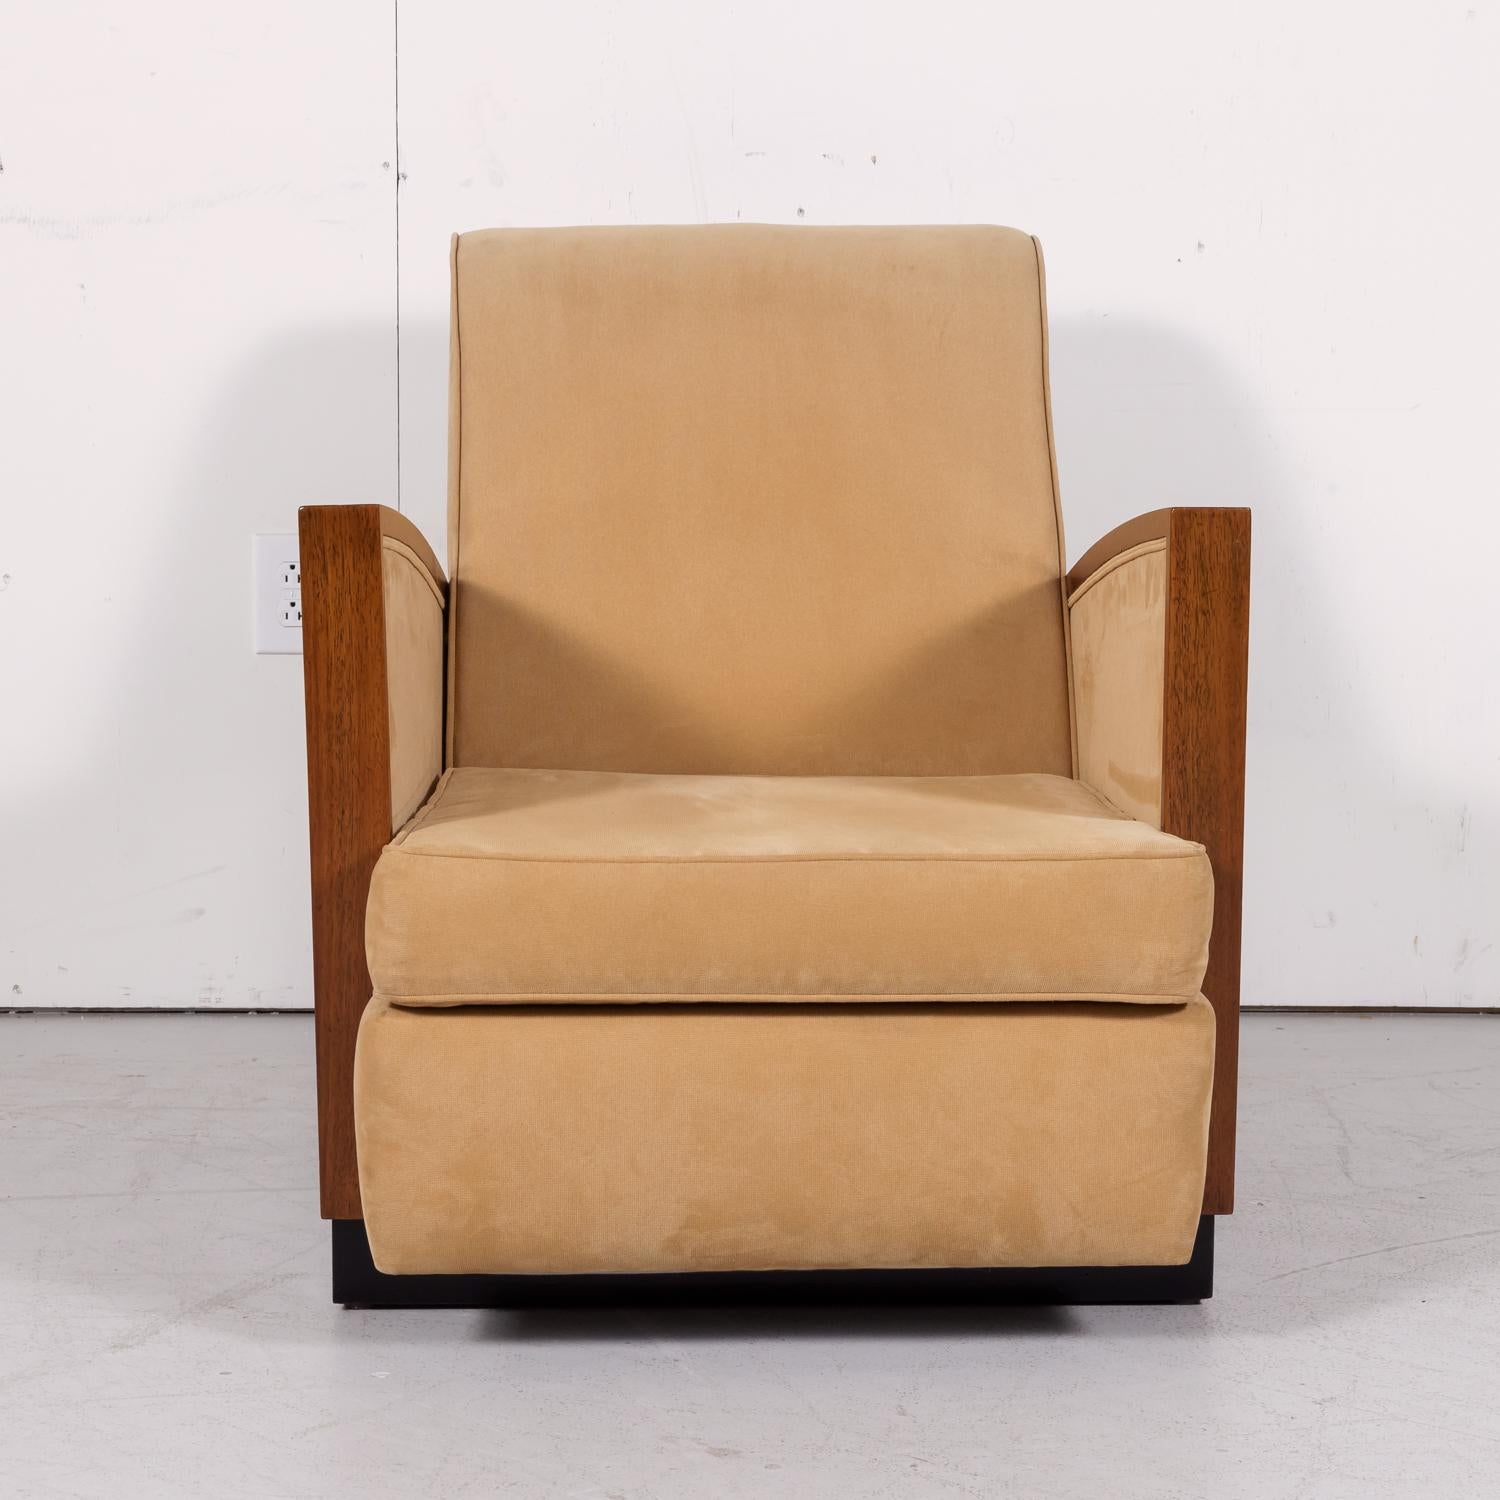 1930s French Art Deco Period Walnut Armchair or Lounge Chair For Sale 1